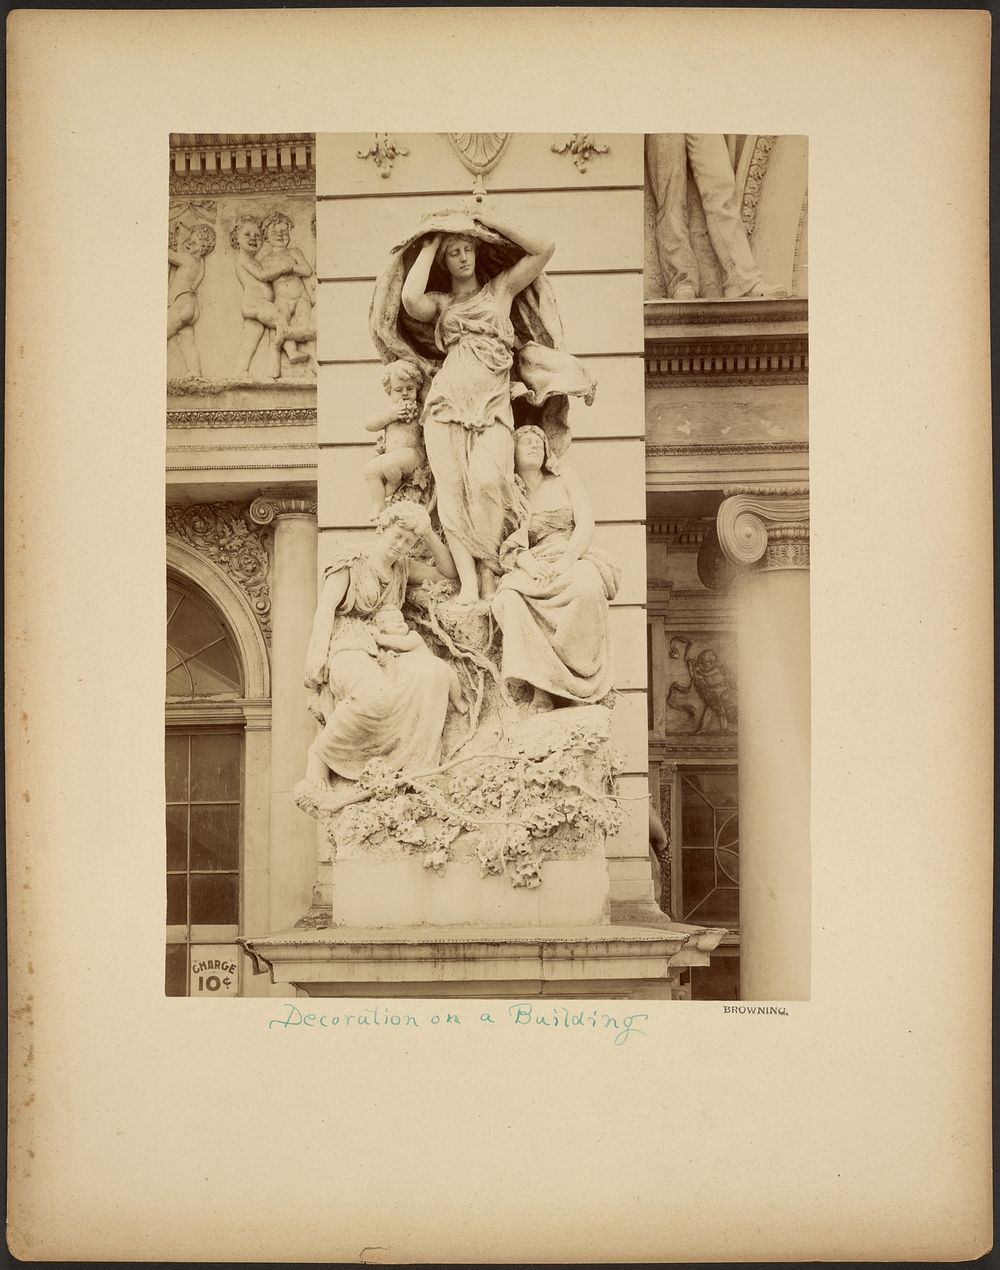 Decoration on a Building by Browning